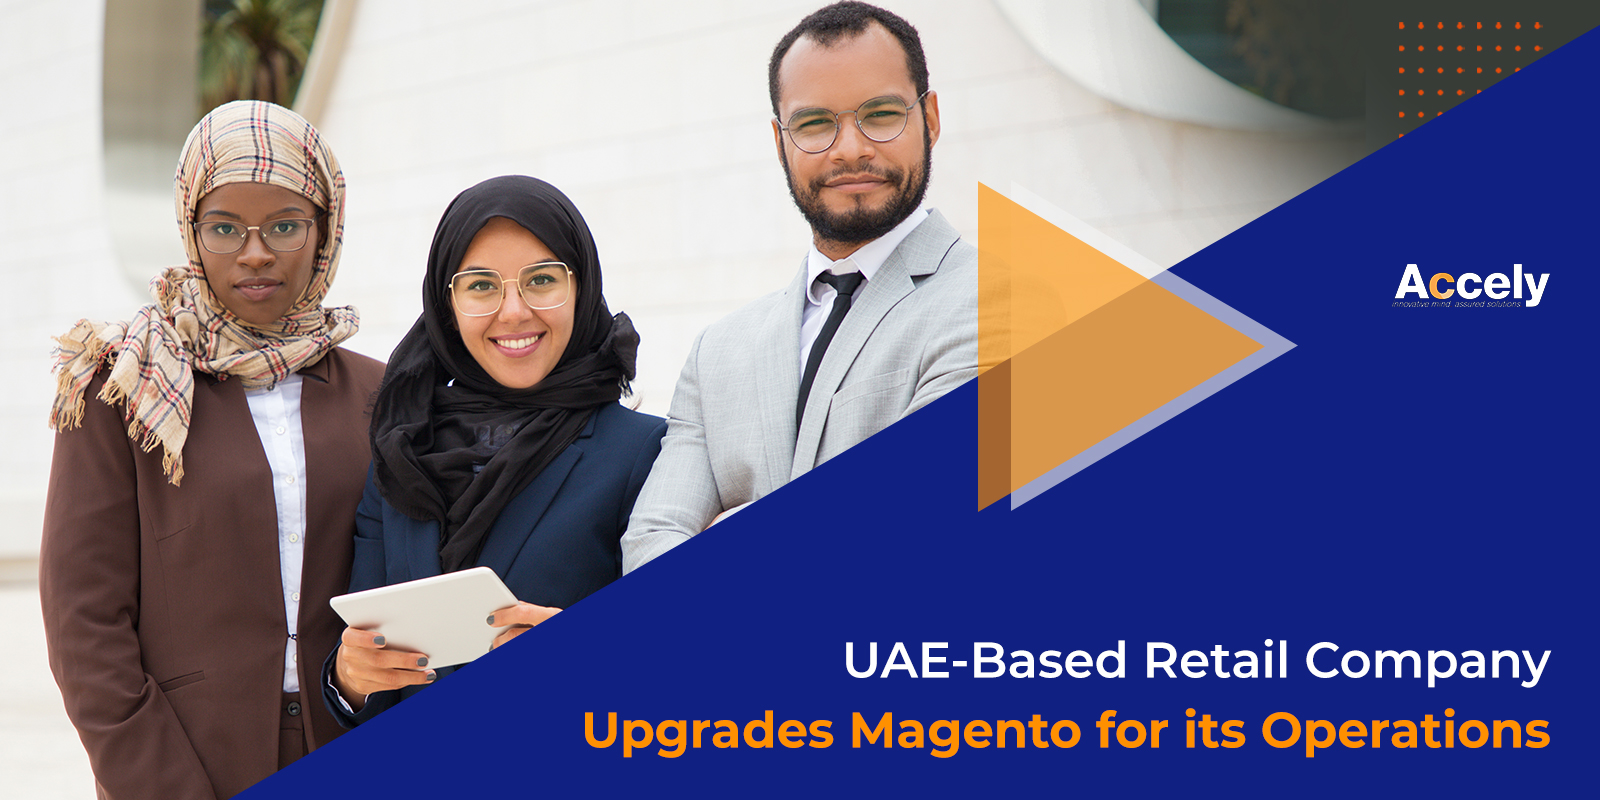 UAE-Based Retail Company Upgrades Magento for its Operations